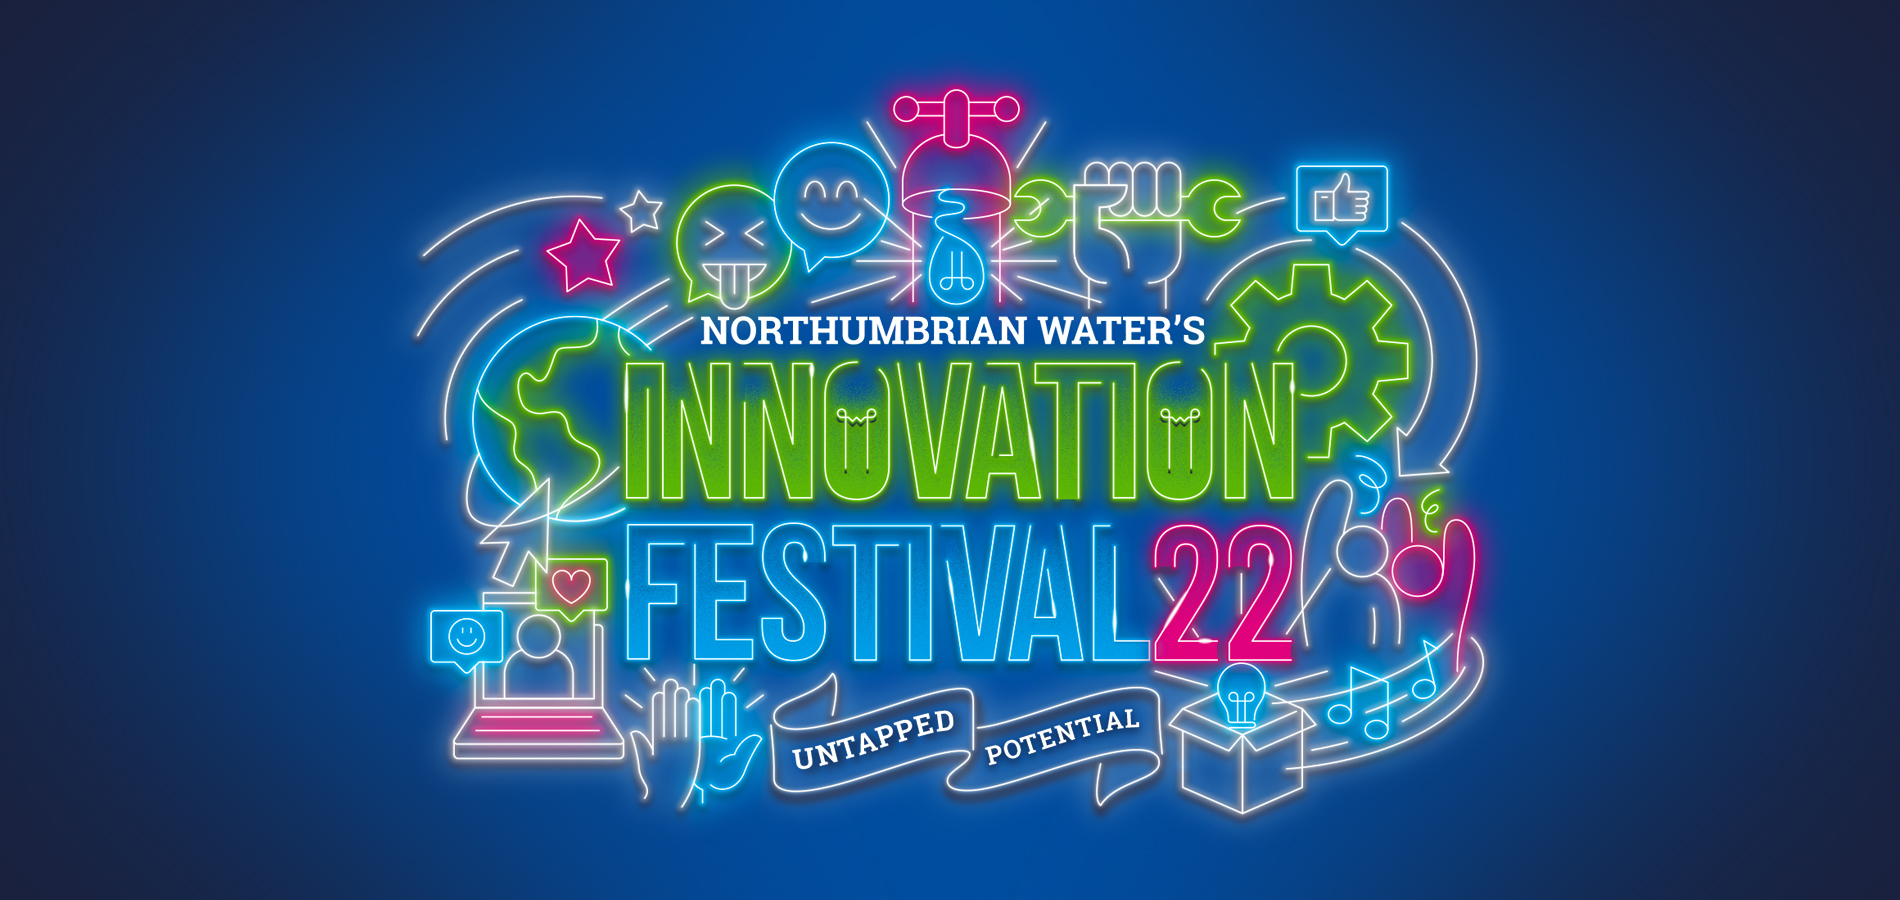 Sign up to be part of all the amazing events happening during our Innovation Festival.